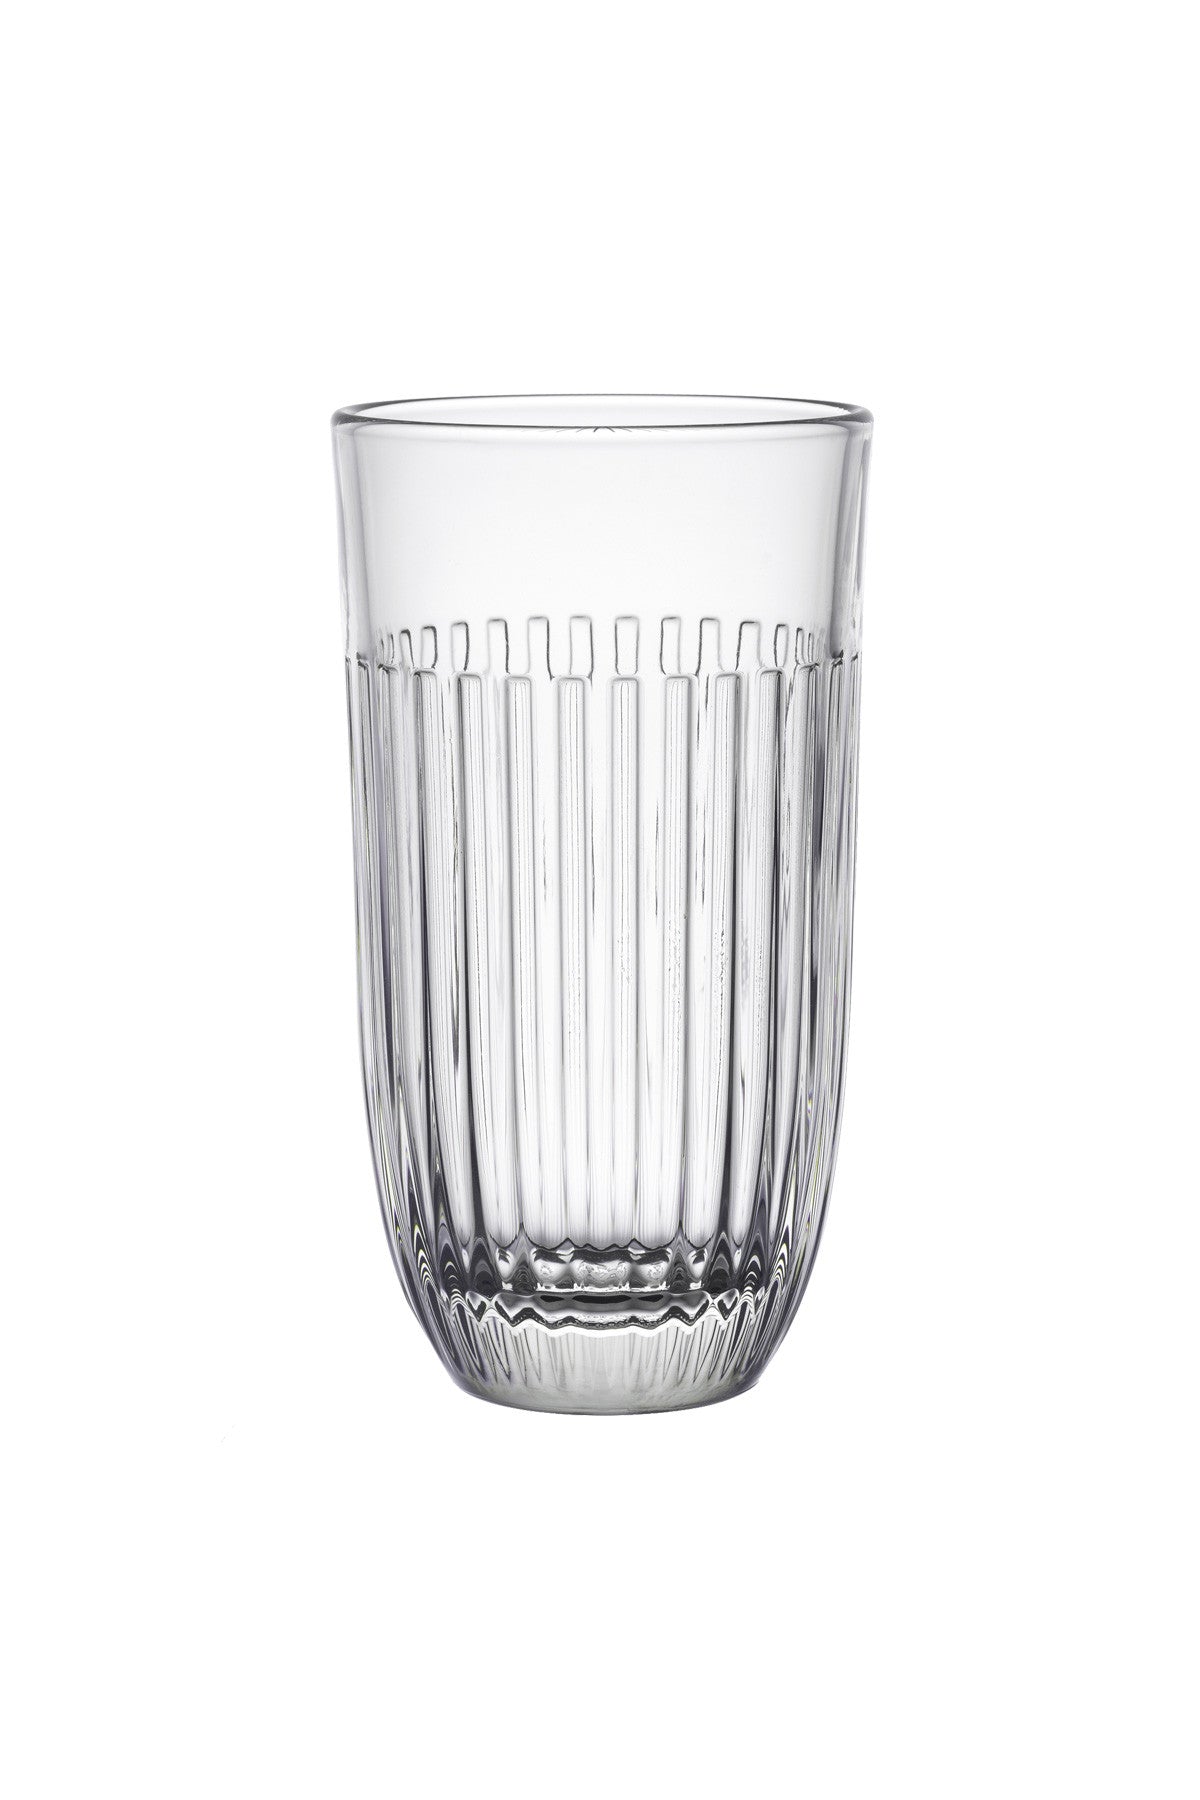 TALL GLASS 450 ml, Ouessant